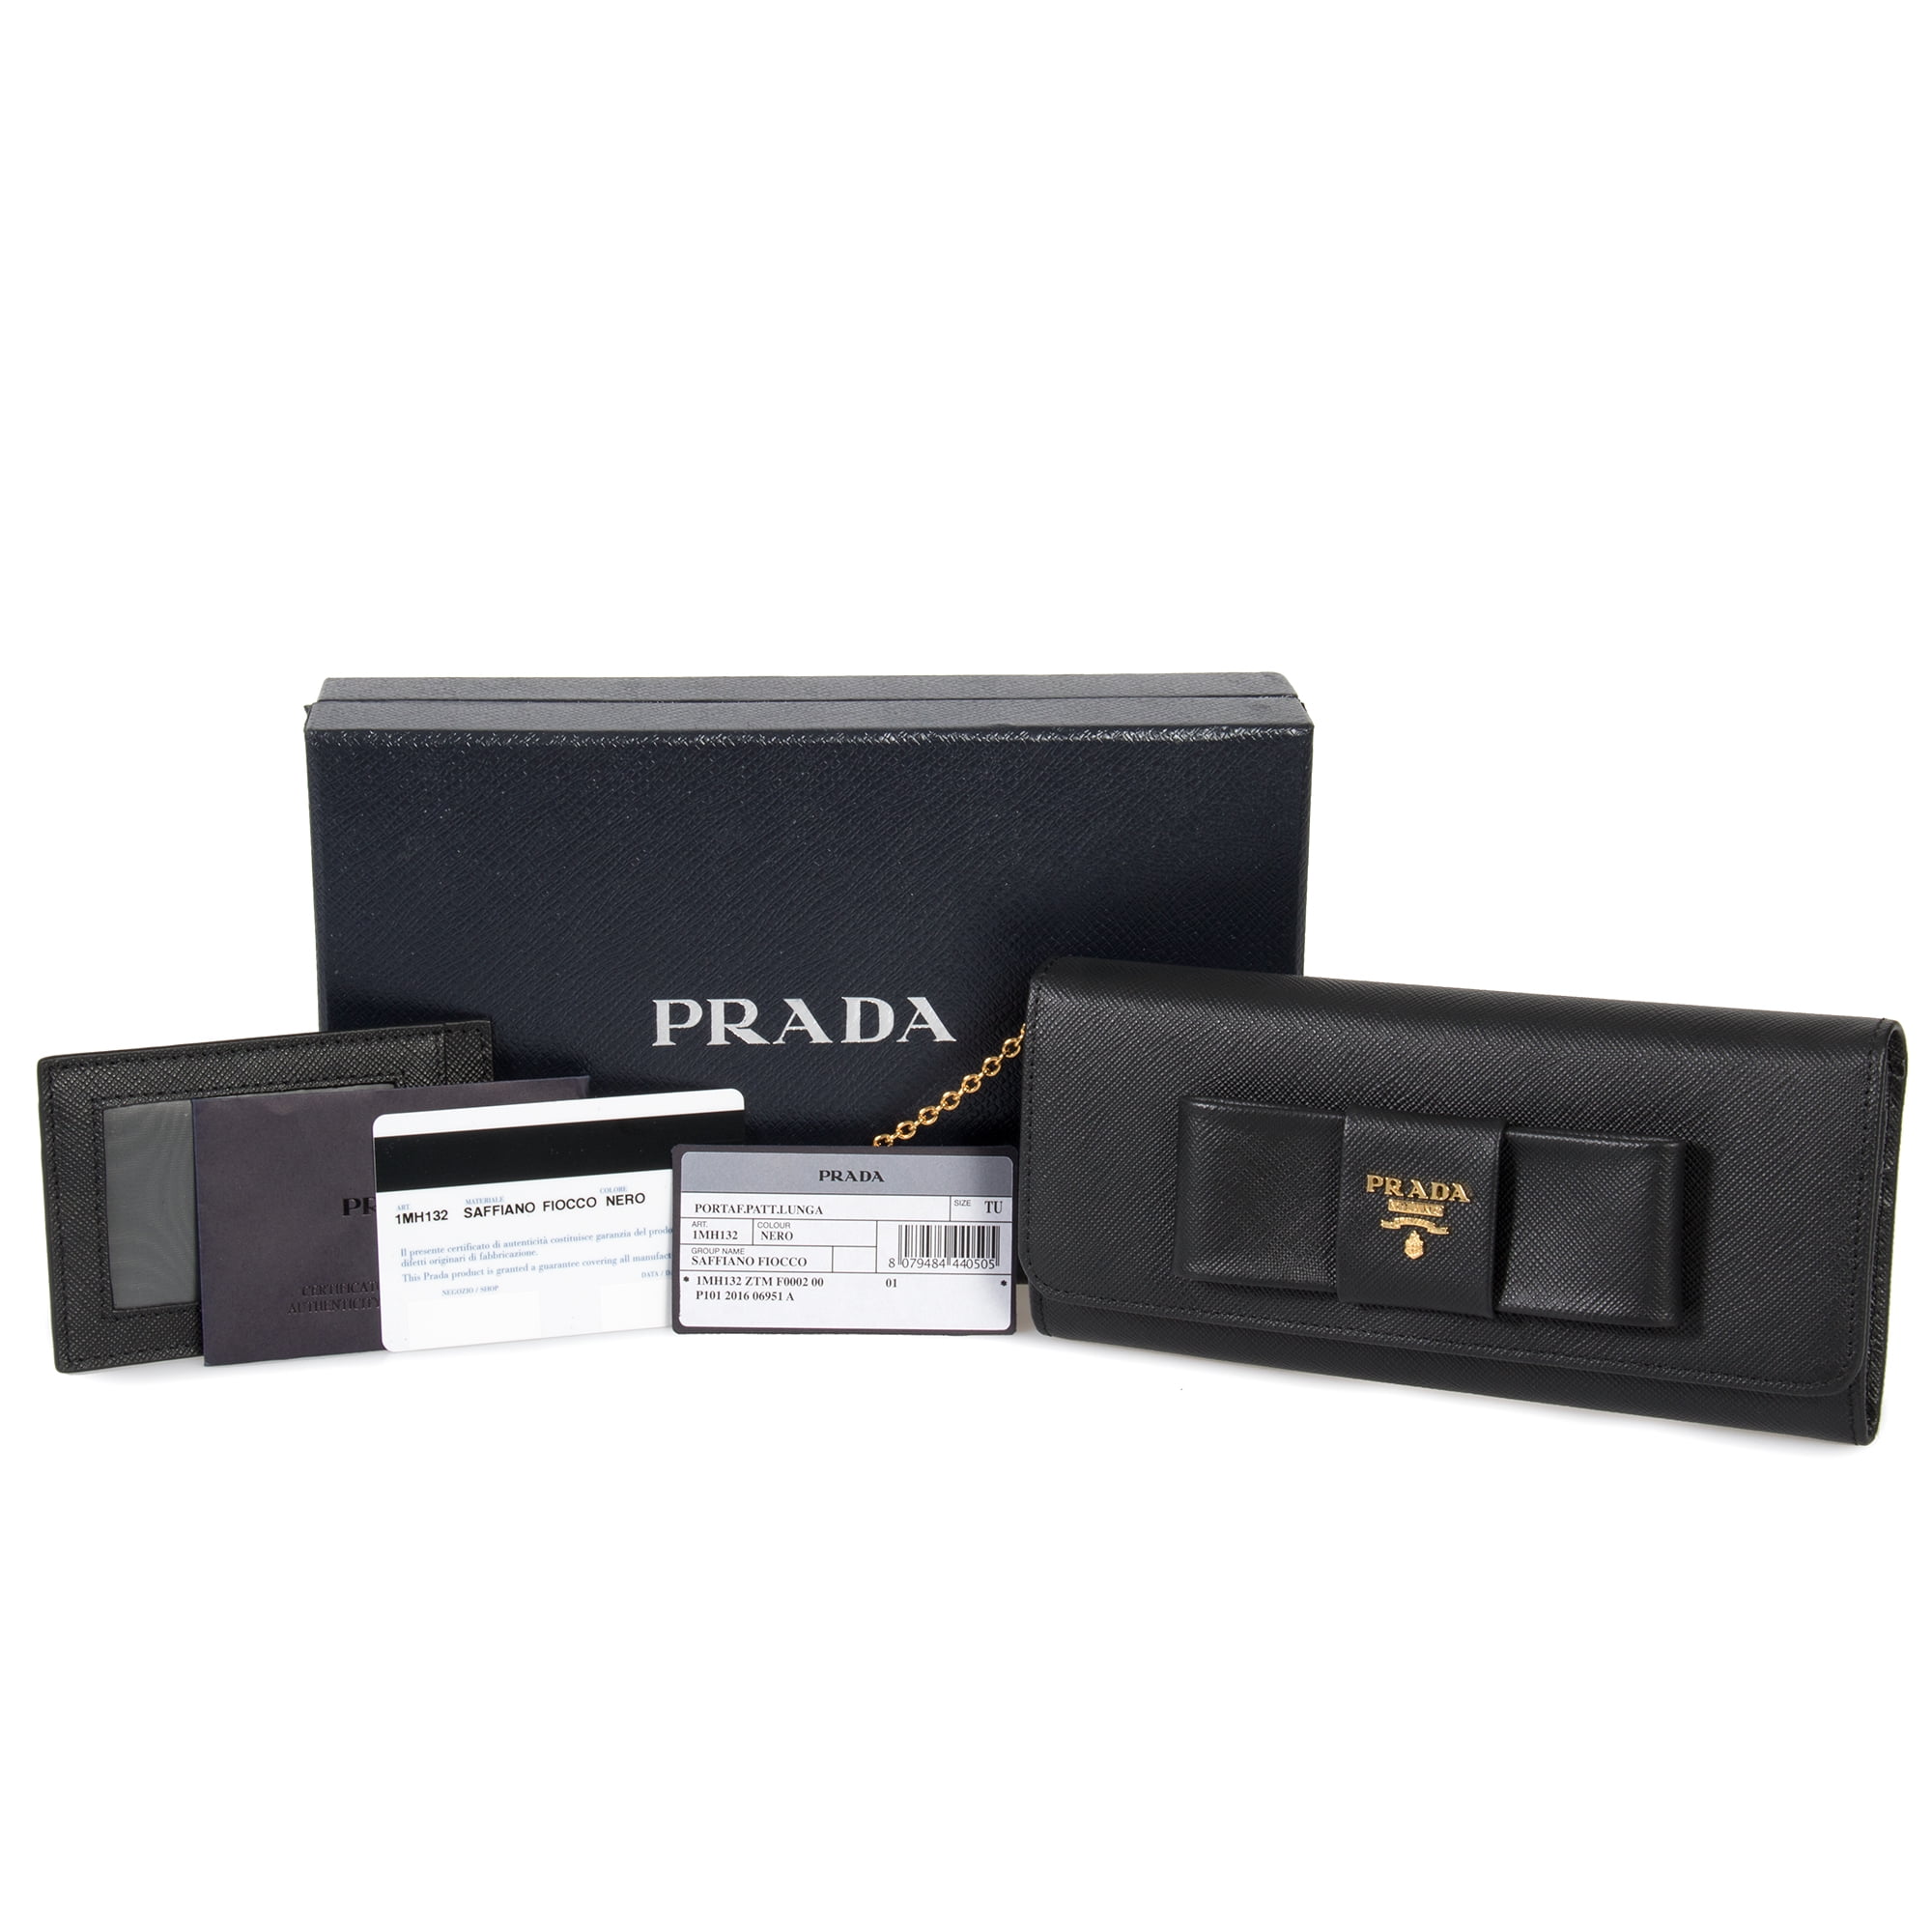 Prada PRD-WALL-1MH132-QME-F0236 Saffiano Leather Flap Wallet with Metal Bar  Detail, Beige - 7.5 W x 3.5 H x 1 D in.